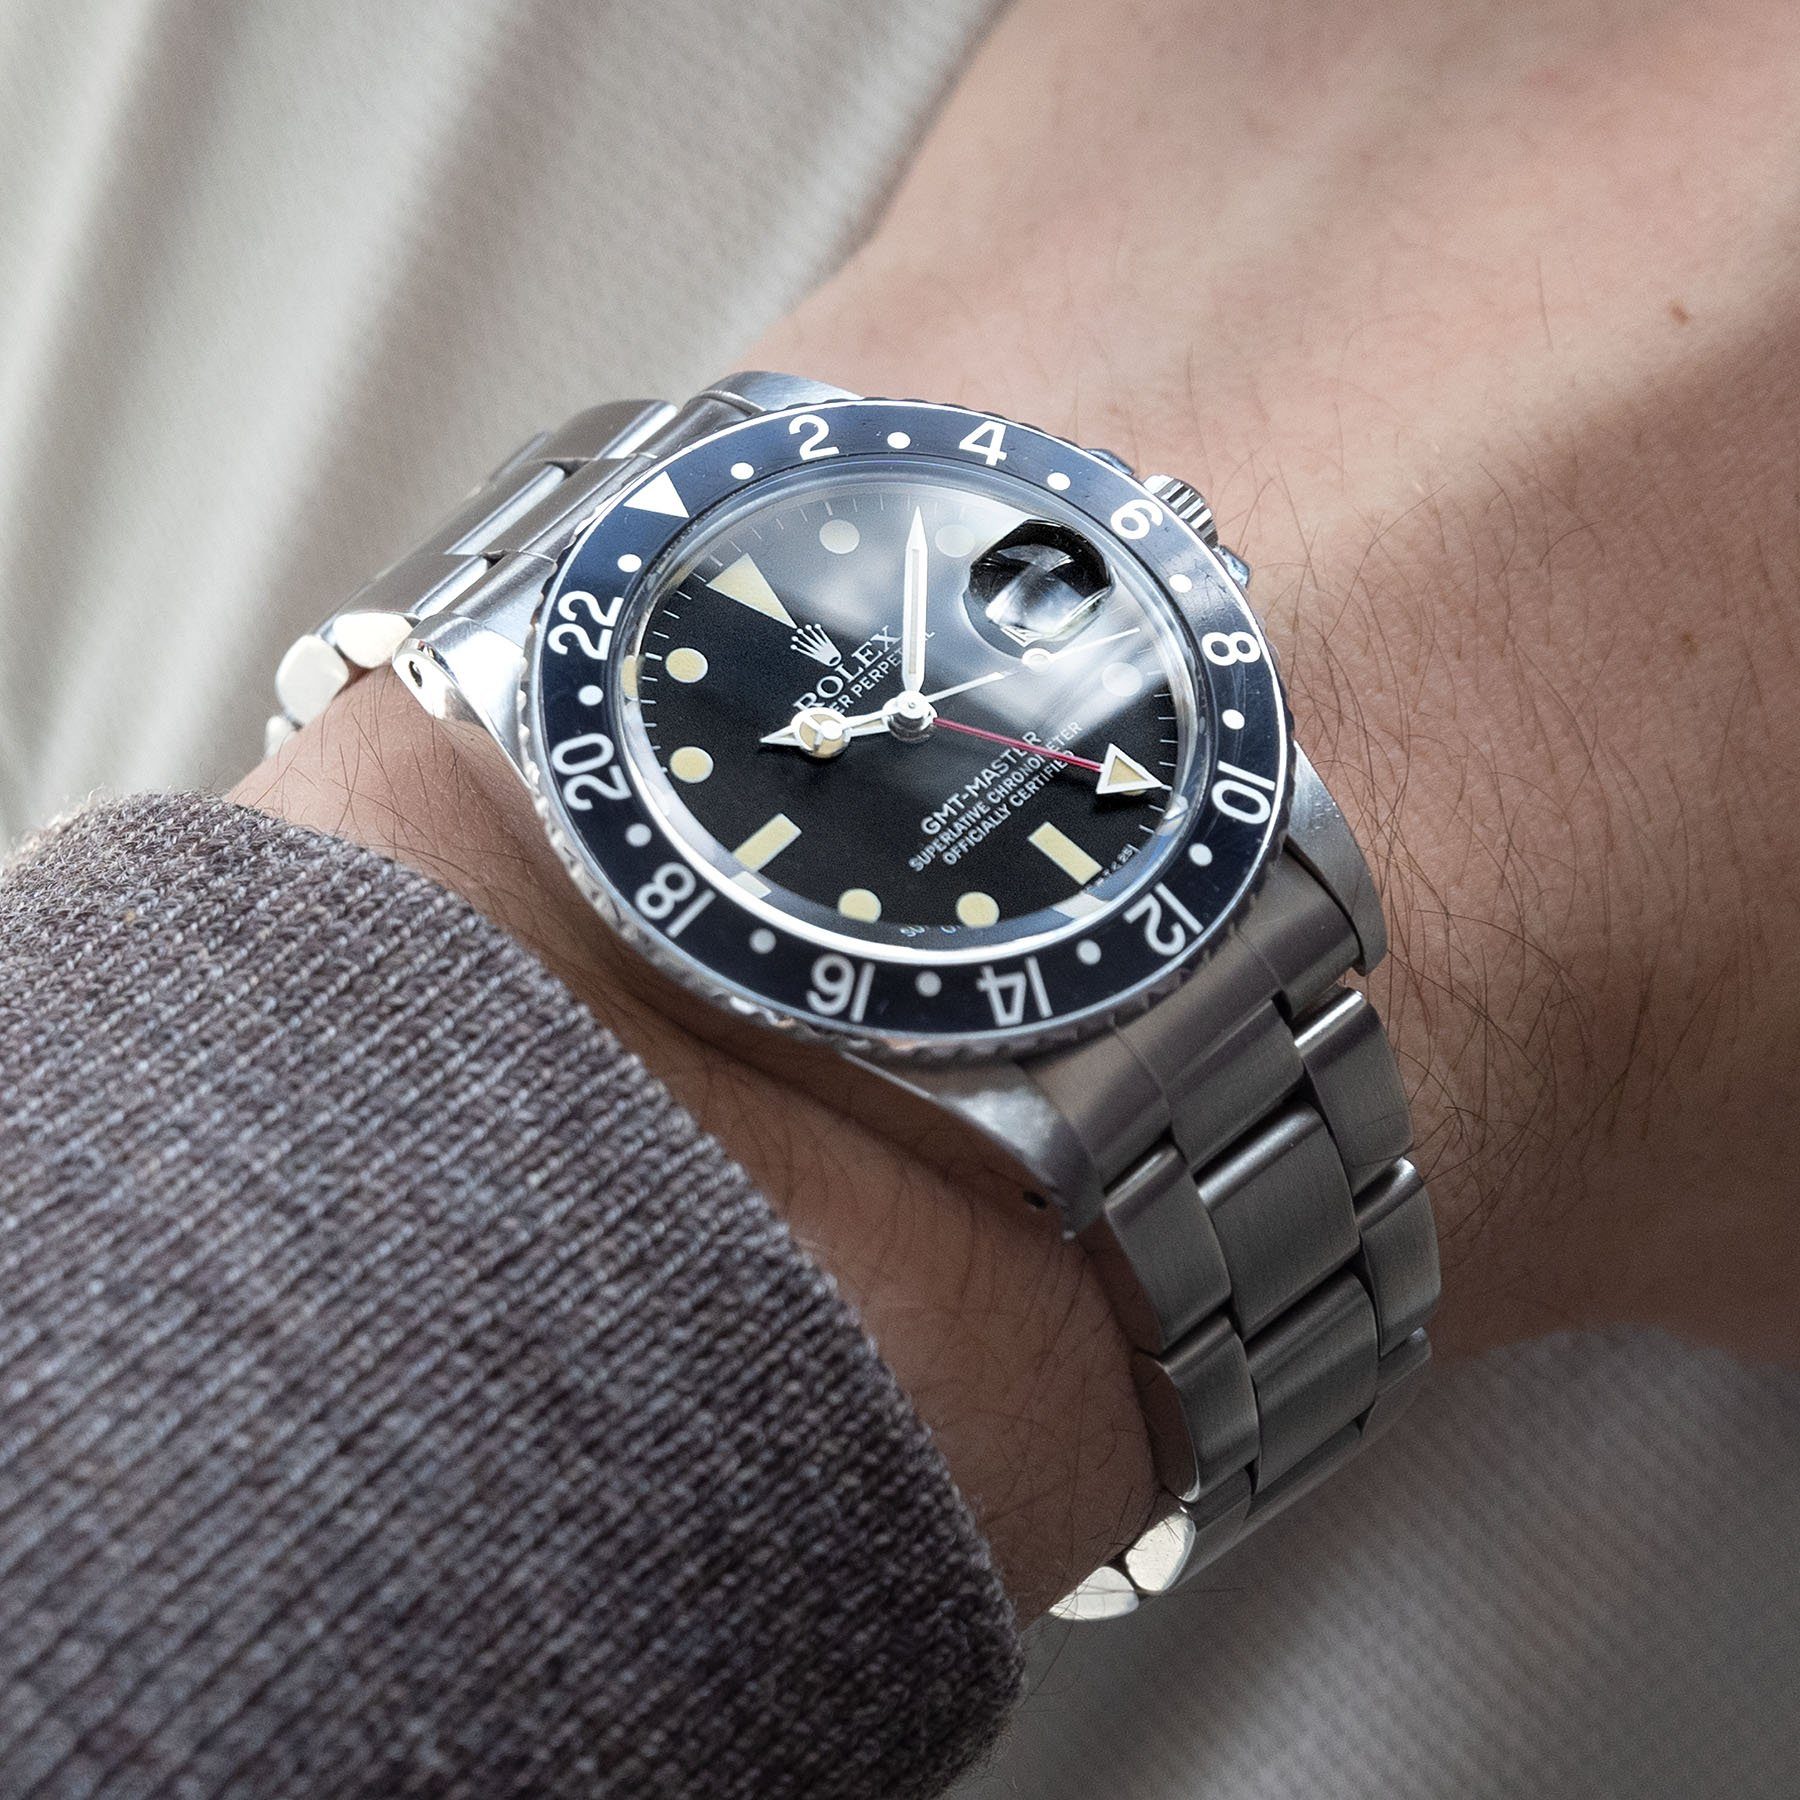 Rolex Gmt master 16750 matte dial with box & papers